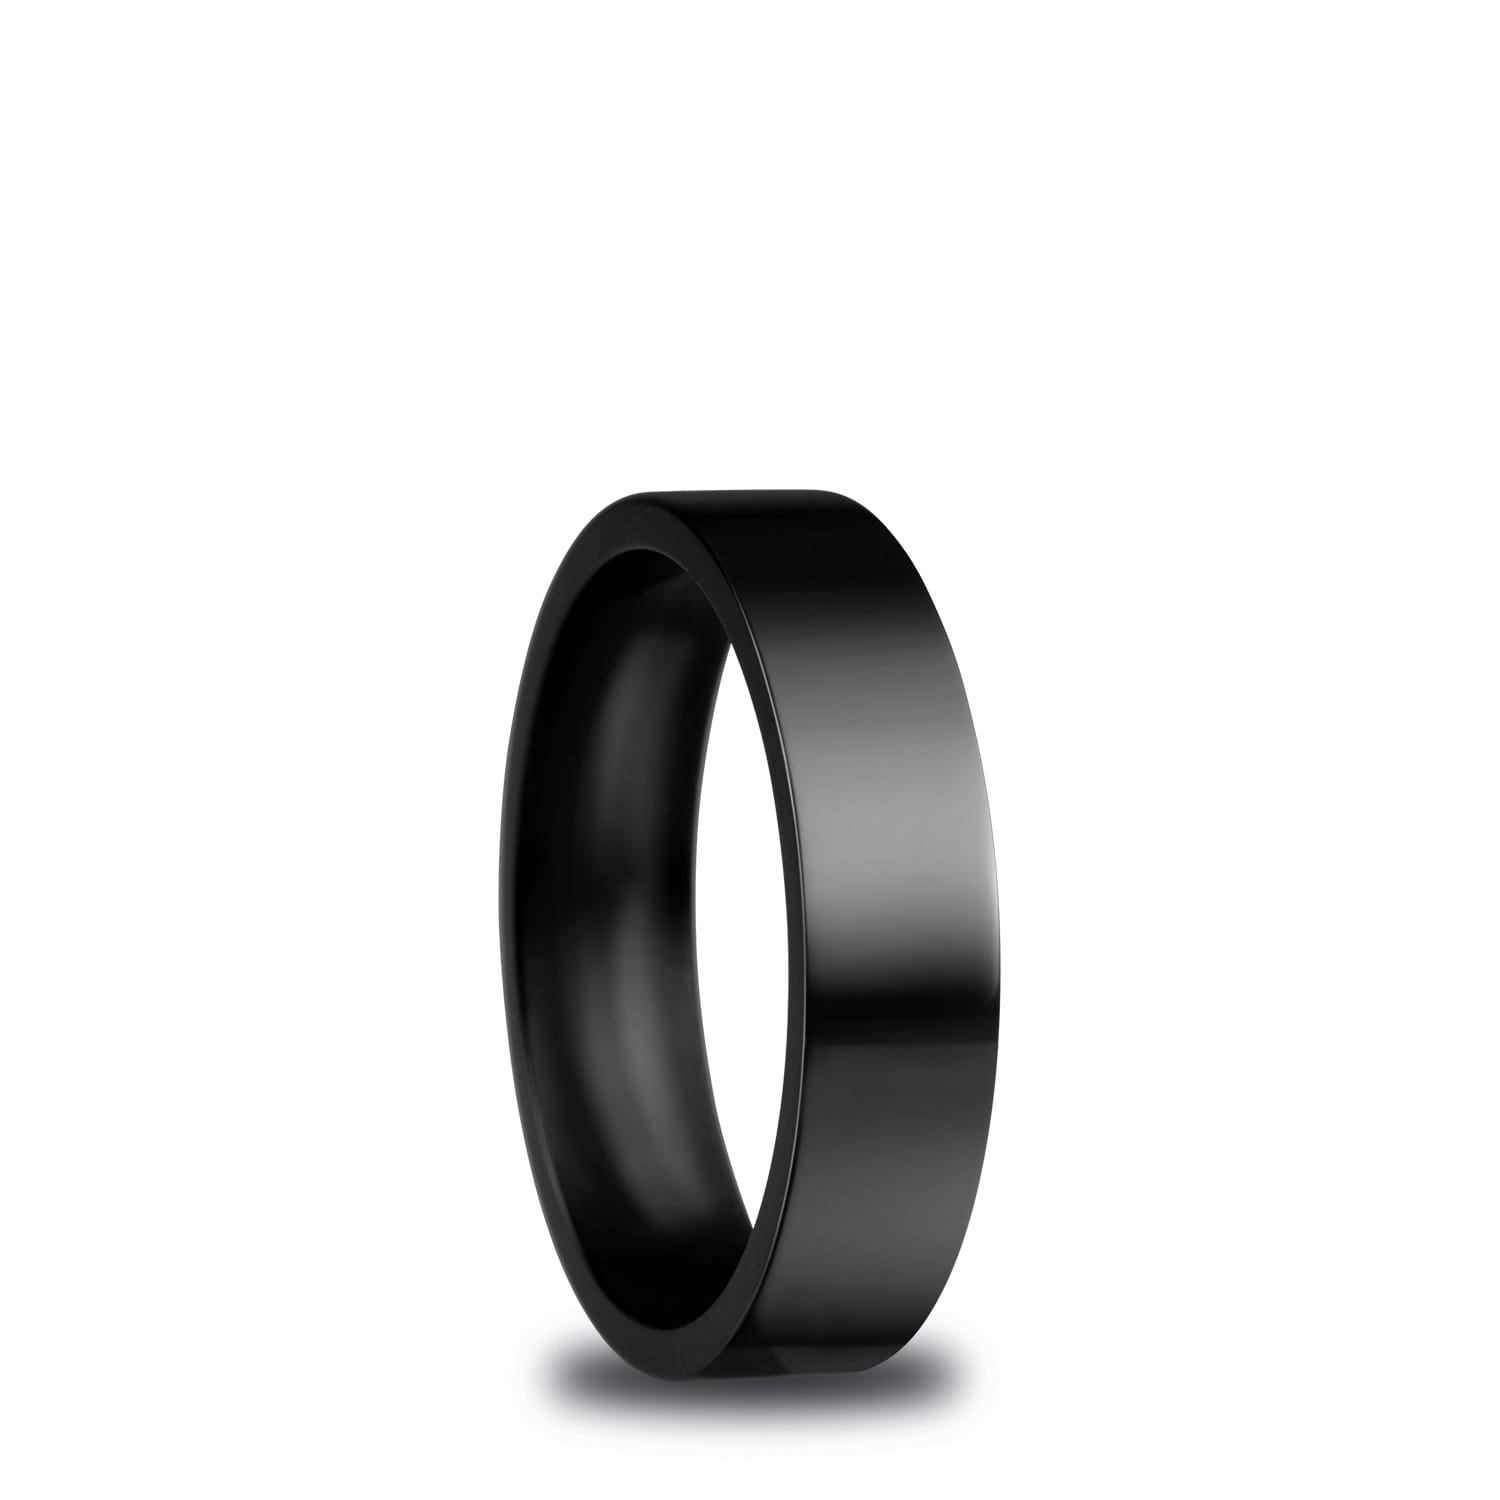 Steel band ring in black colour, glossy and smooth surface, 8 mm |  Jewellery Eshop EU